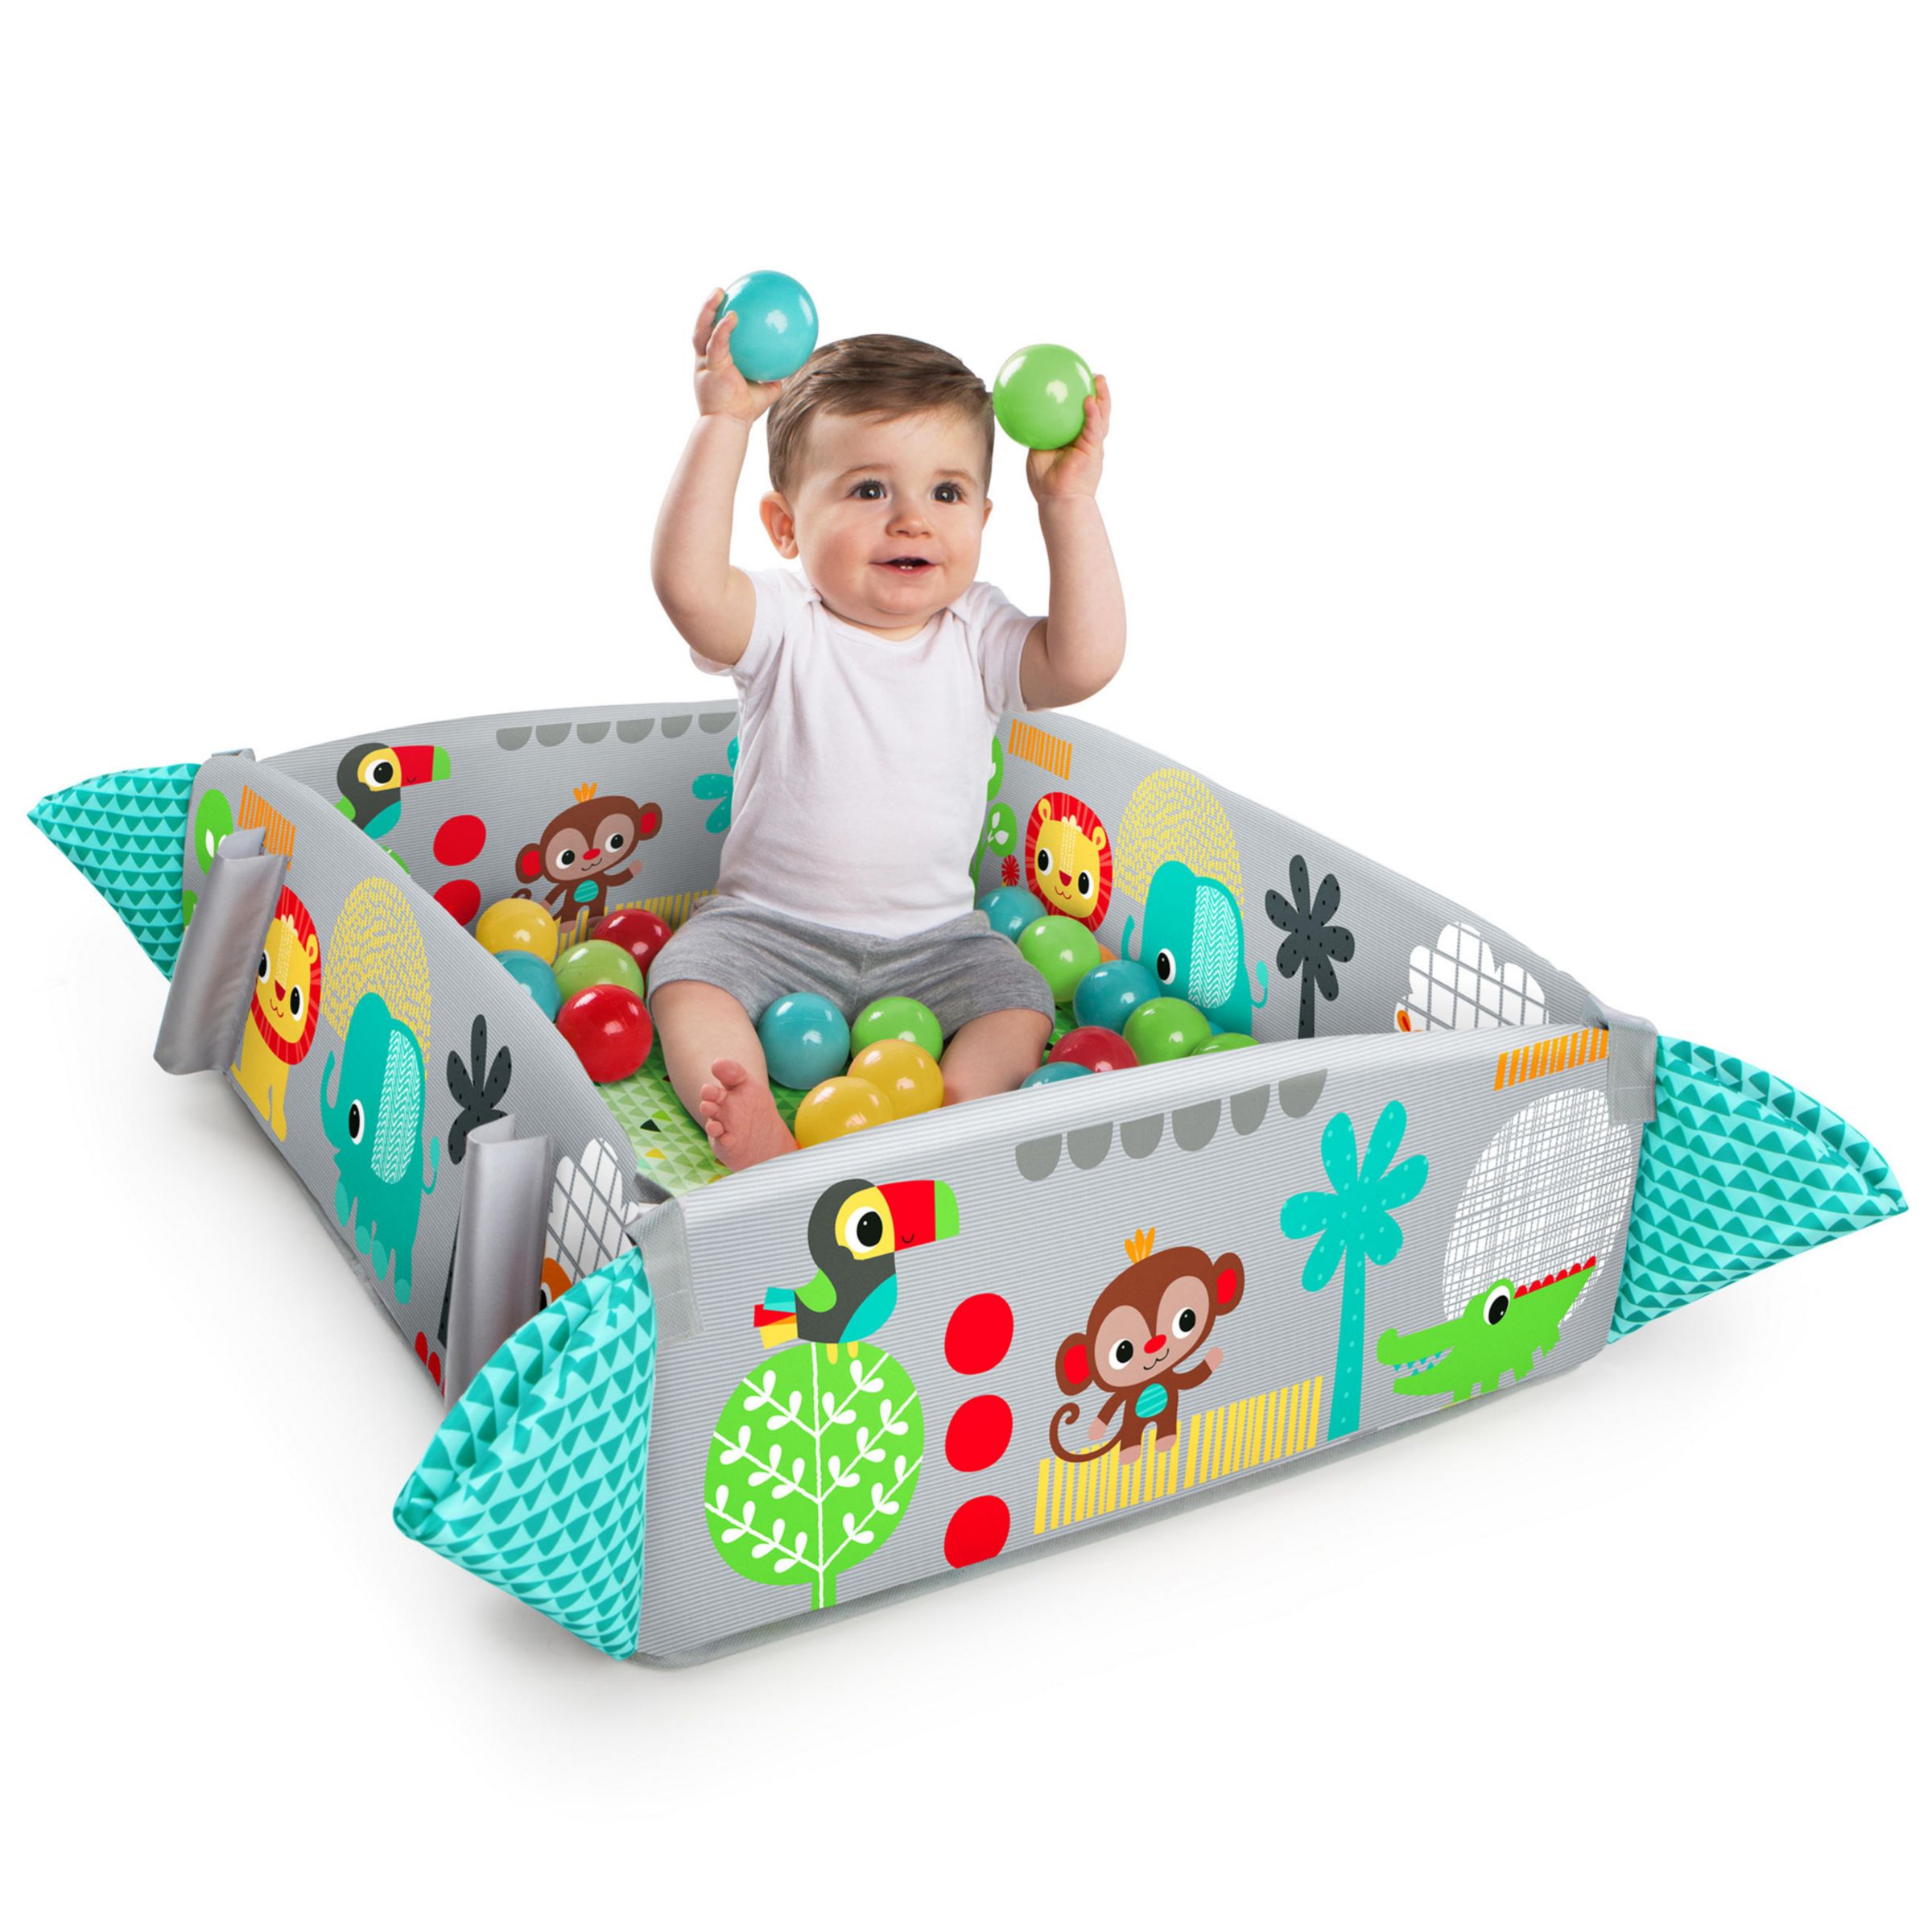 5 in 1 ball play activity gym